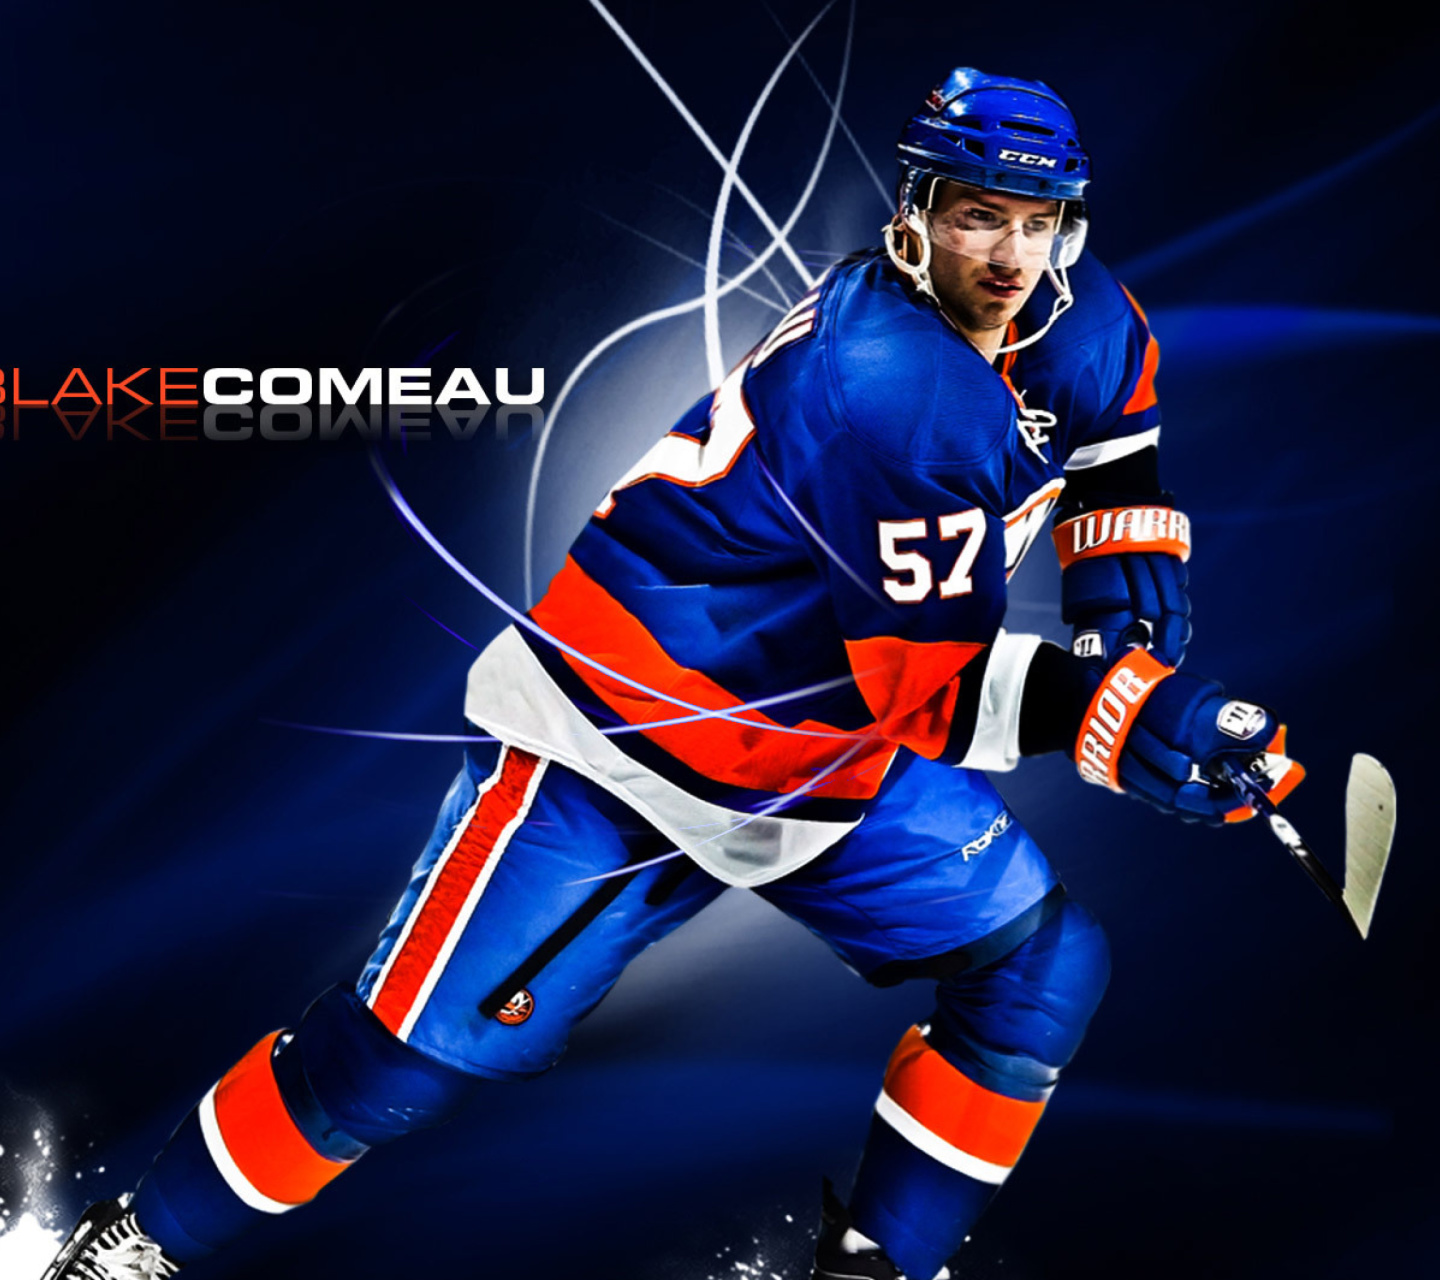 Blake Comeau from HL wallpaper 1440x1280